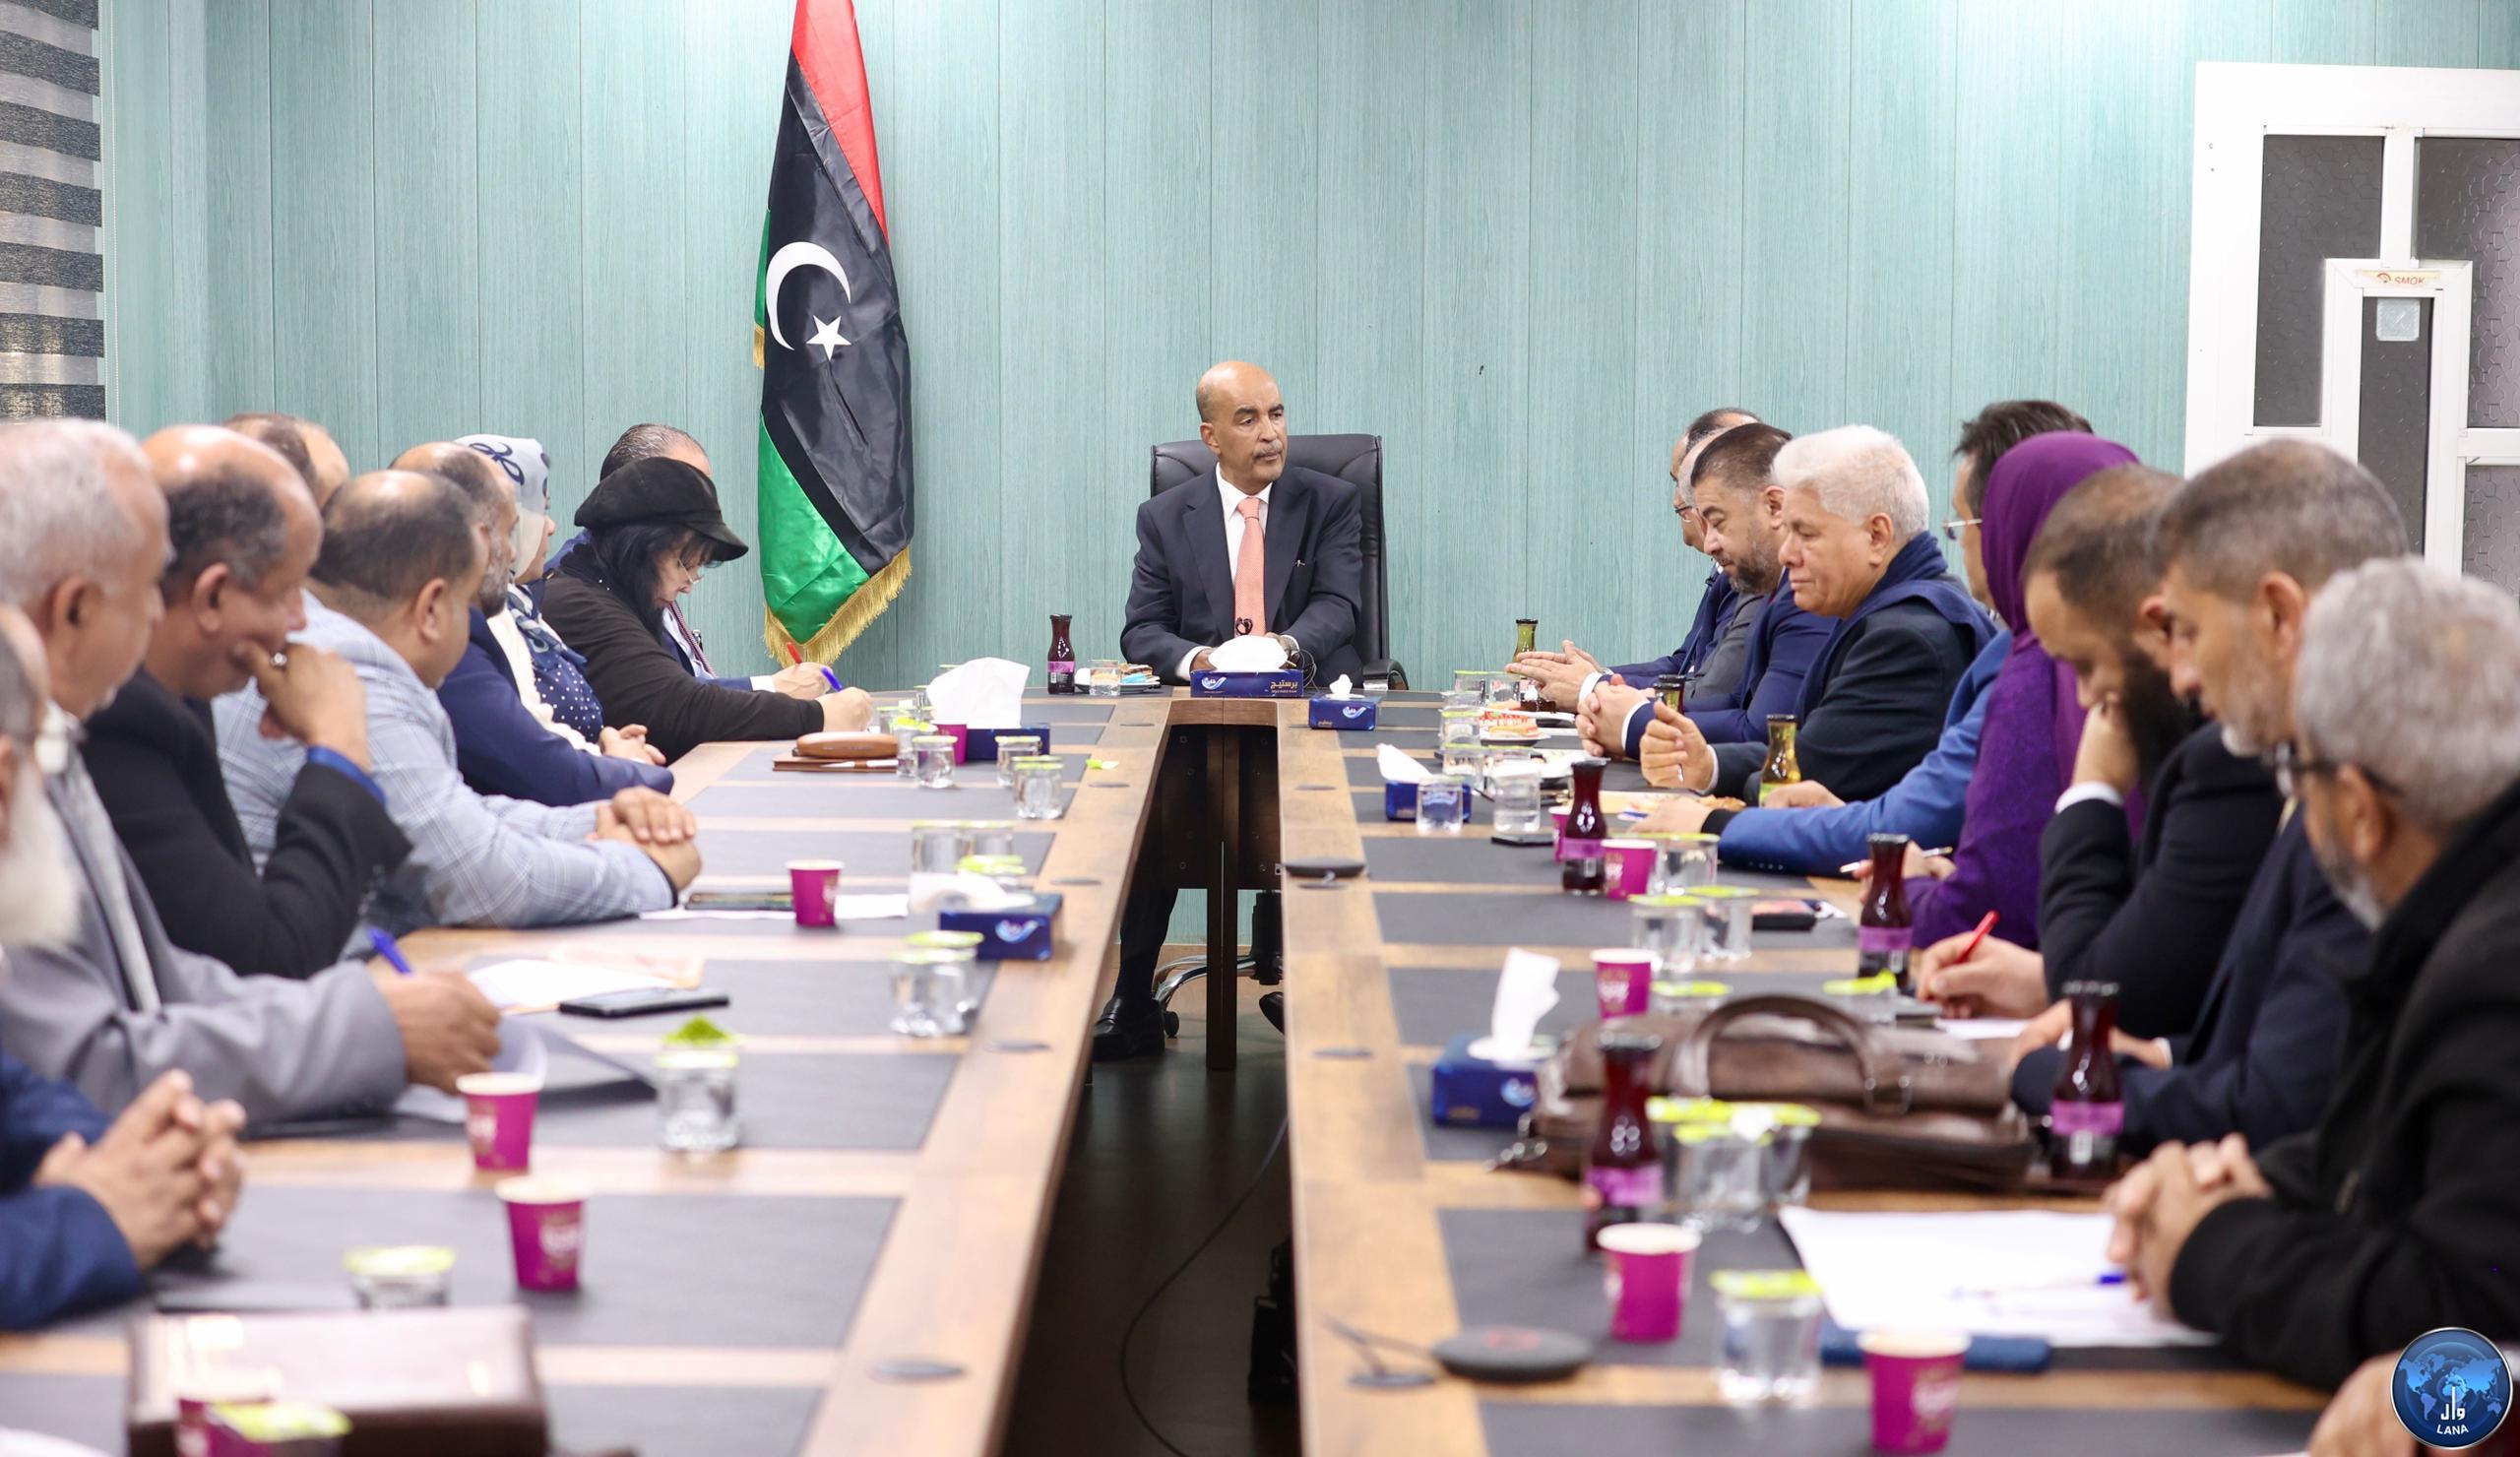 Al-Koni meets with the head of the Libyan Authority for Scientific Research and elite Libyan experts and academics.